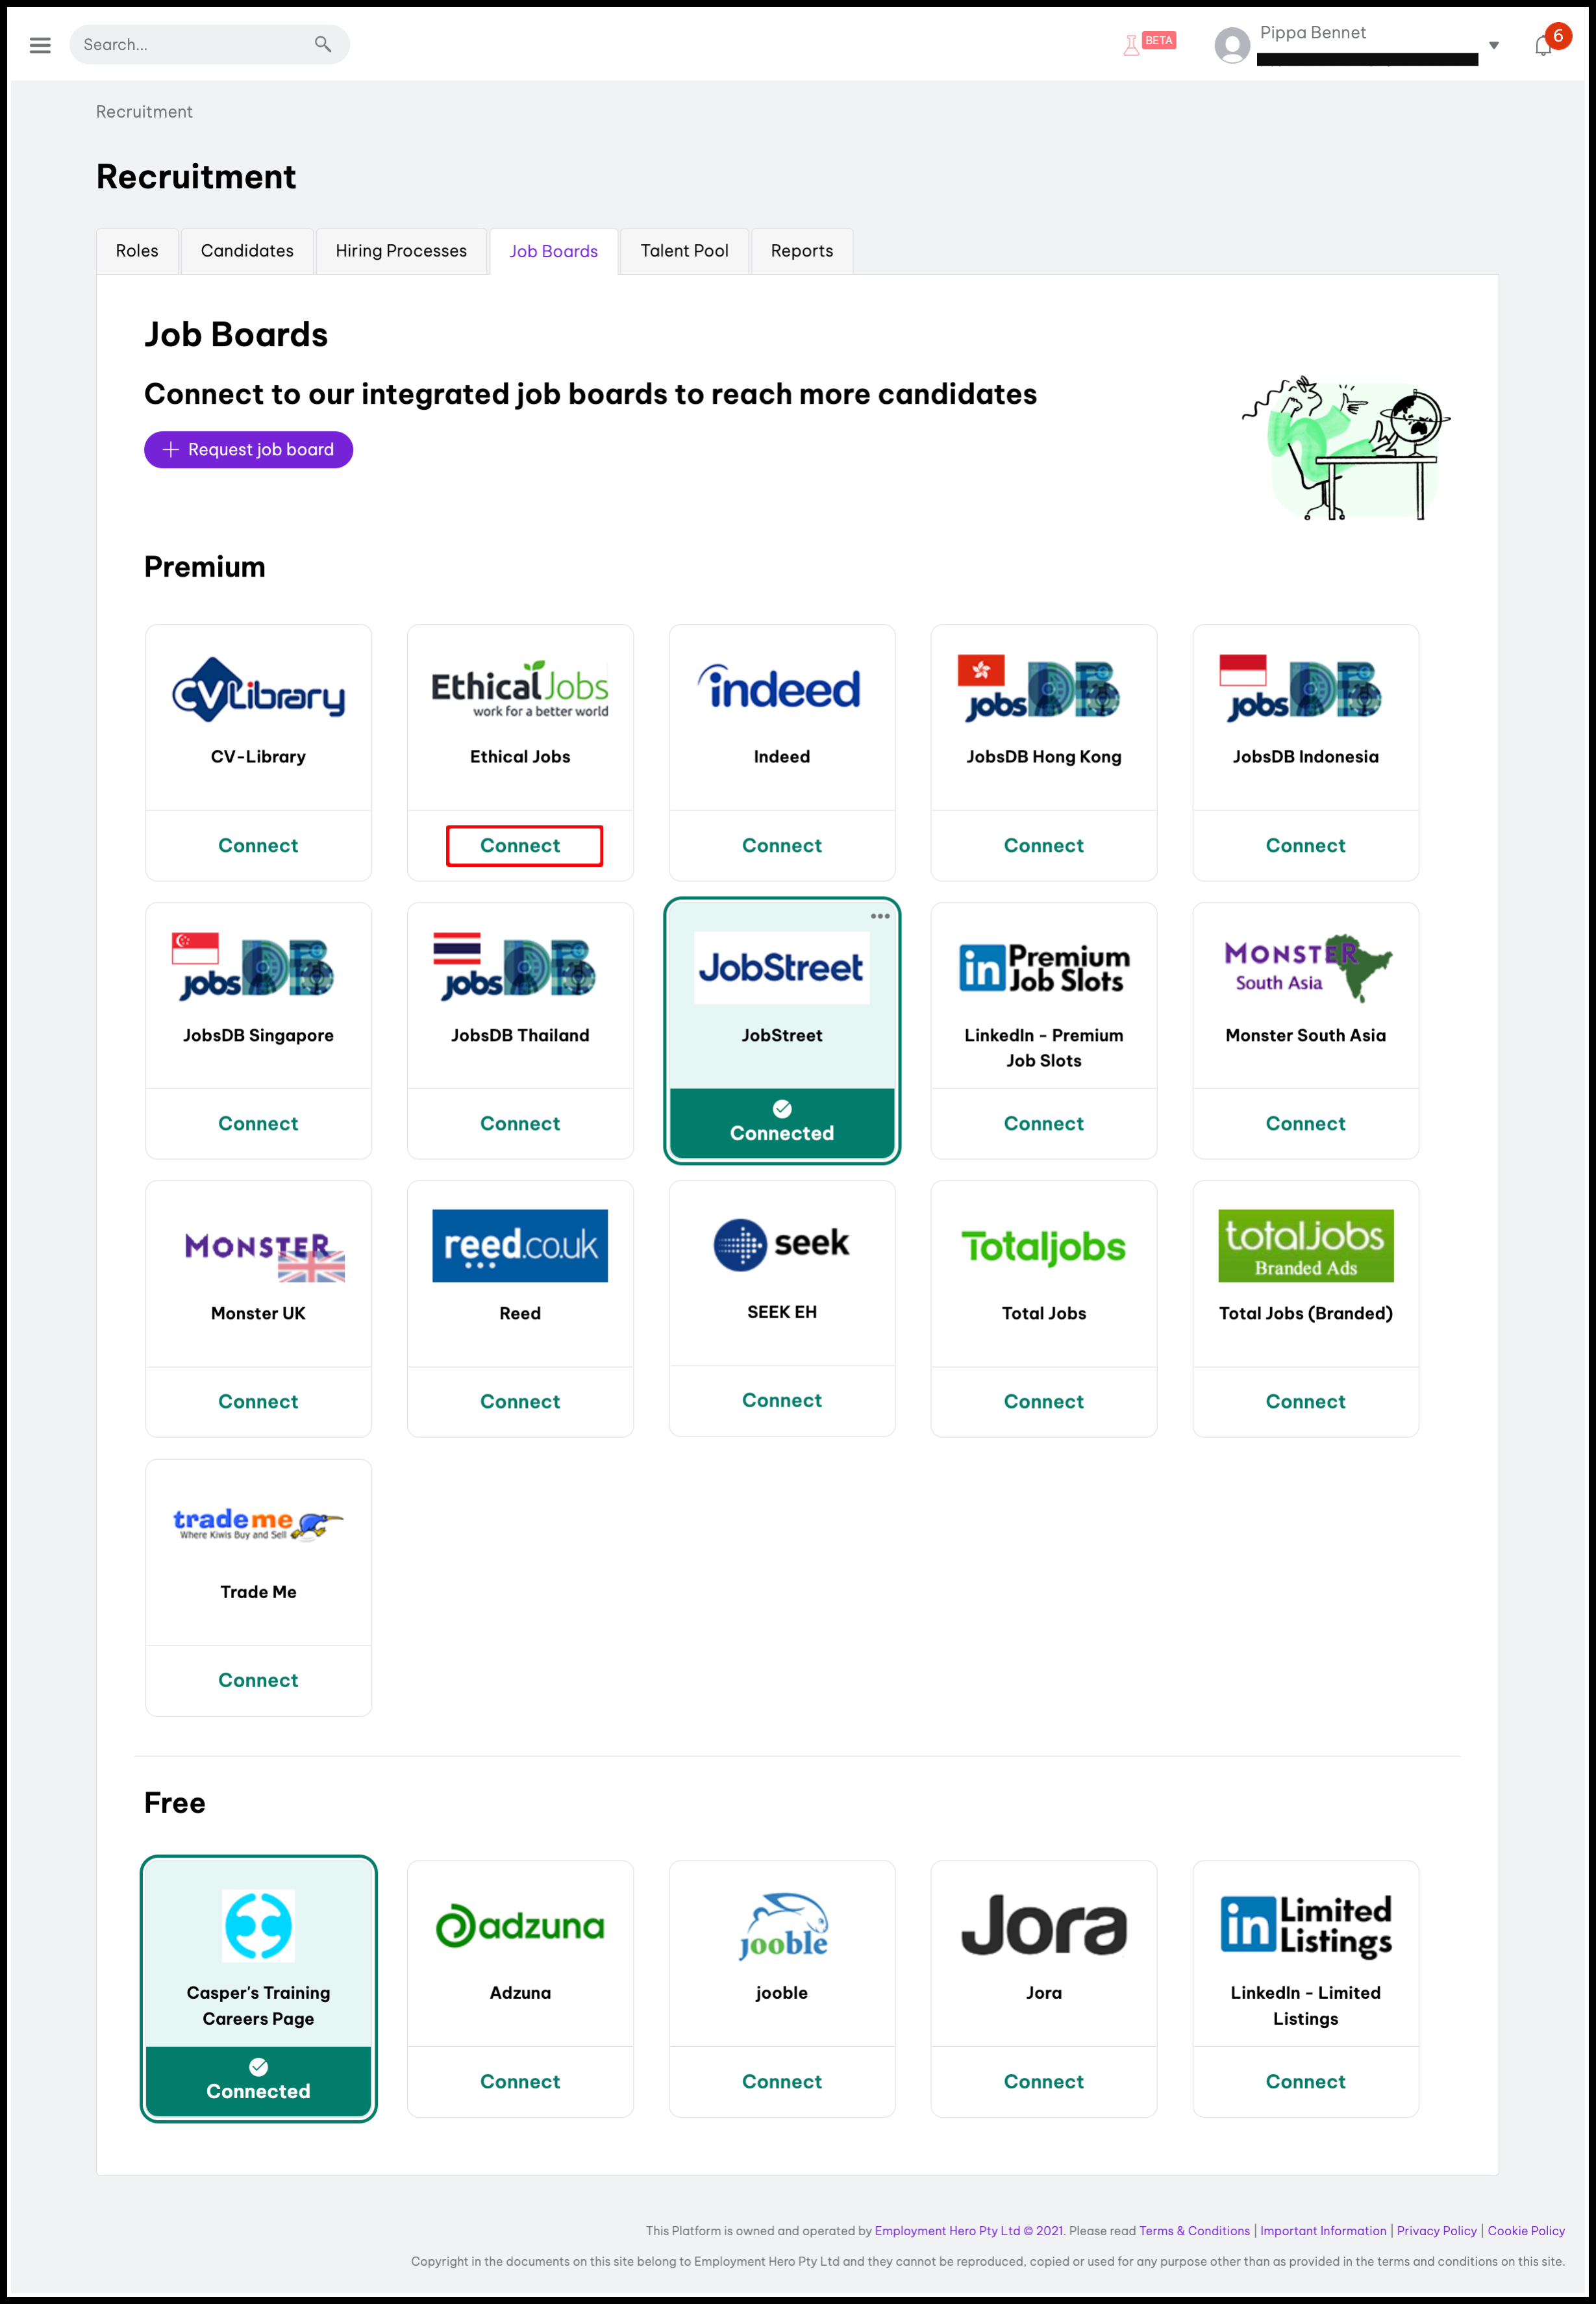 screenshot of all available job boards arranged on screen as tiles with premium ones at the top and free ones at the bottom. at the top there is a button saying requesst new board and under the logo for each job board the word connect or connected is written.